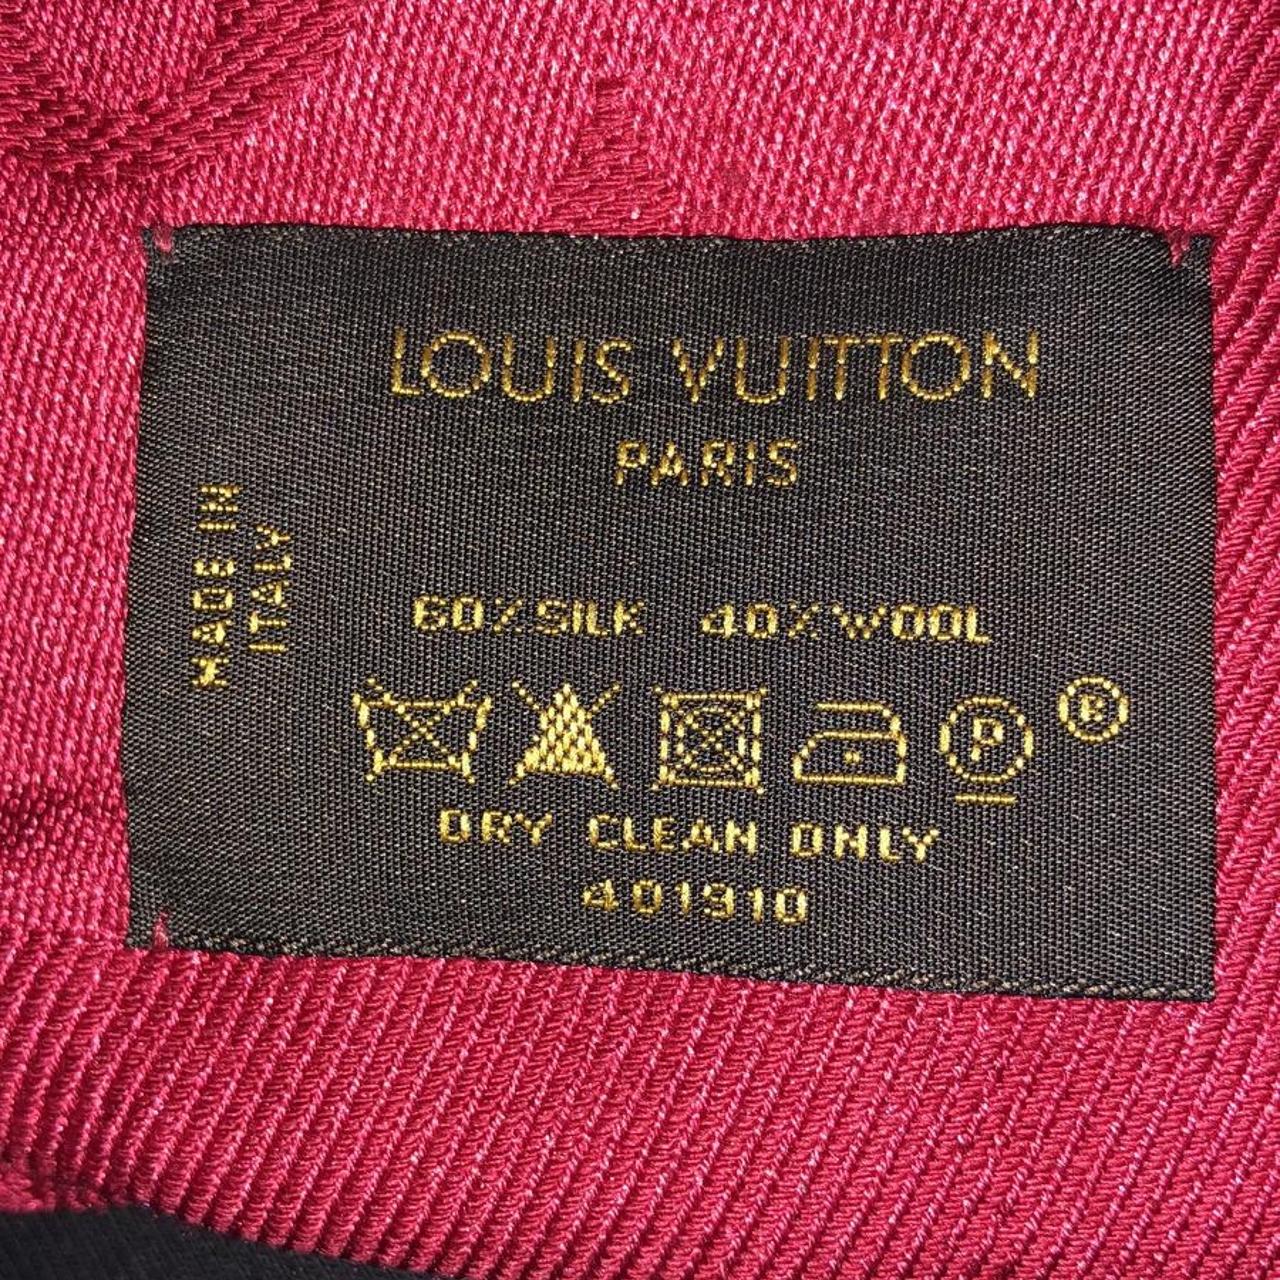 Louis Vuitton Supreme Sweater (AUTHENTIC) Only - Depop